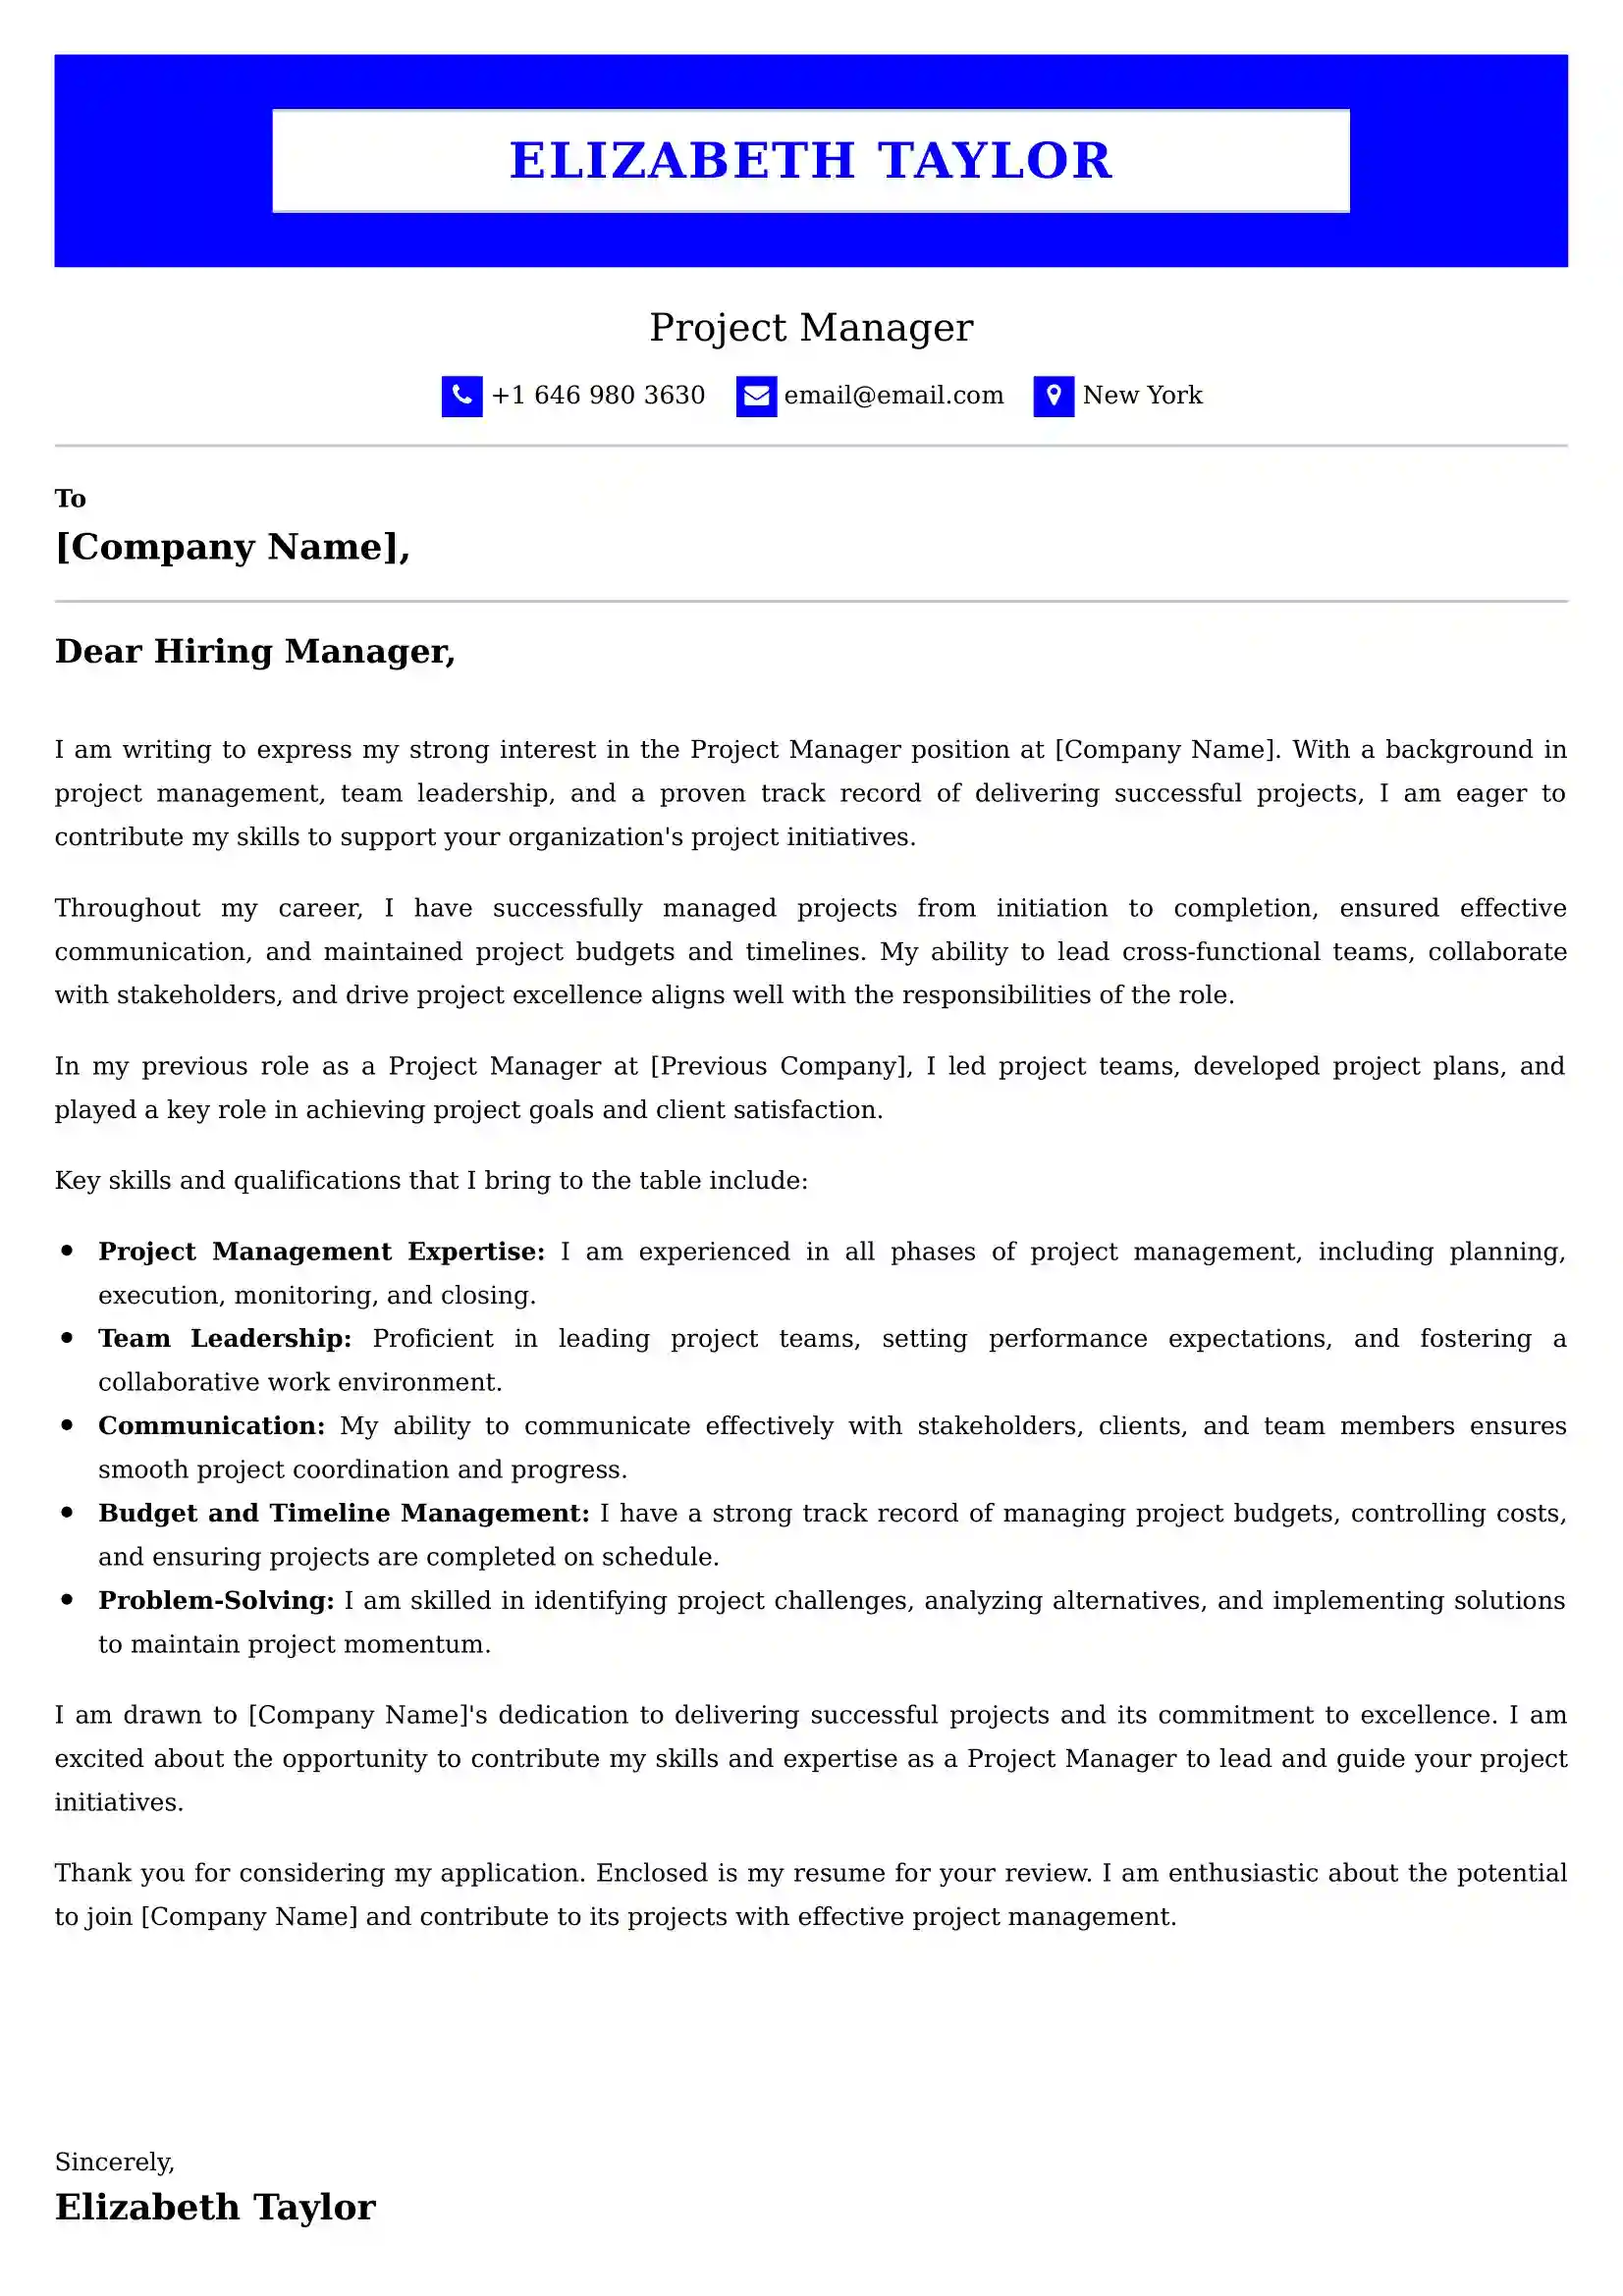 Project Manager Cover Letter Examples - US Format and Tips